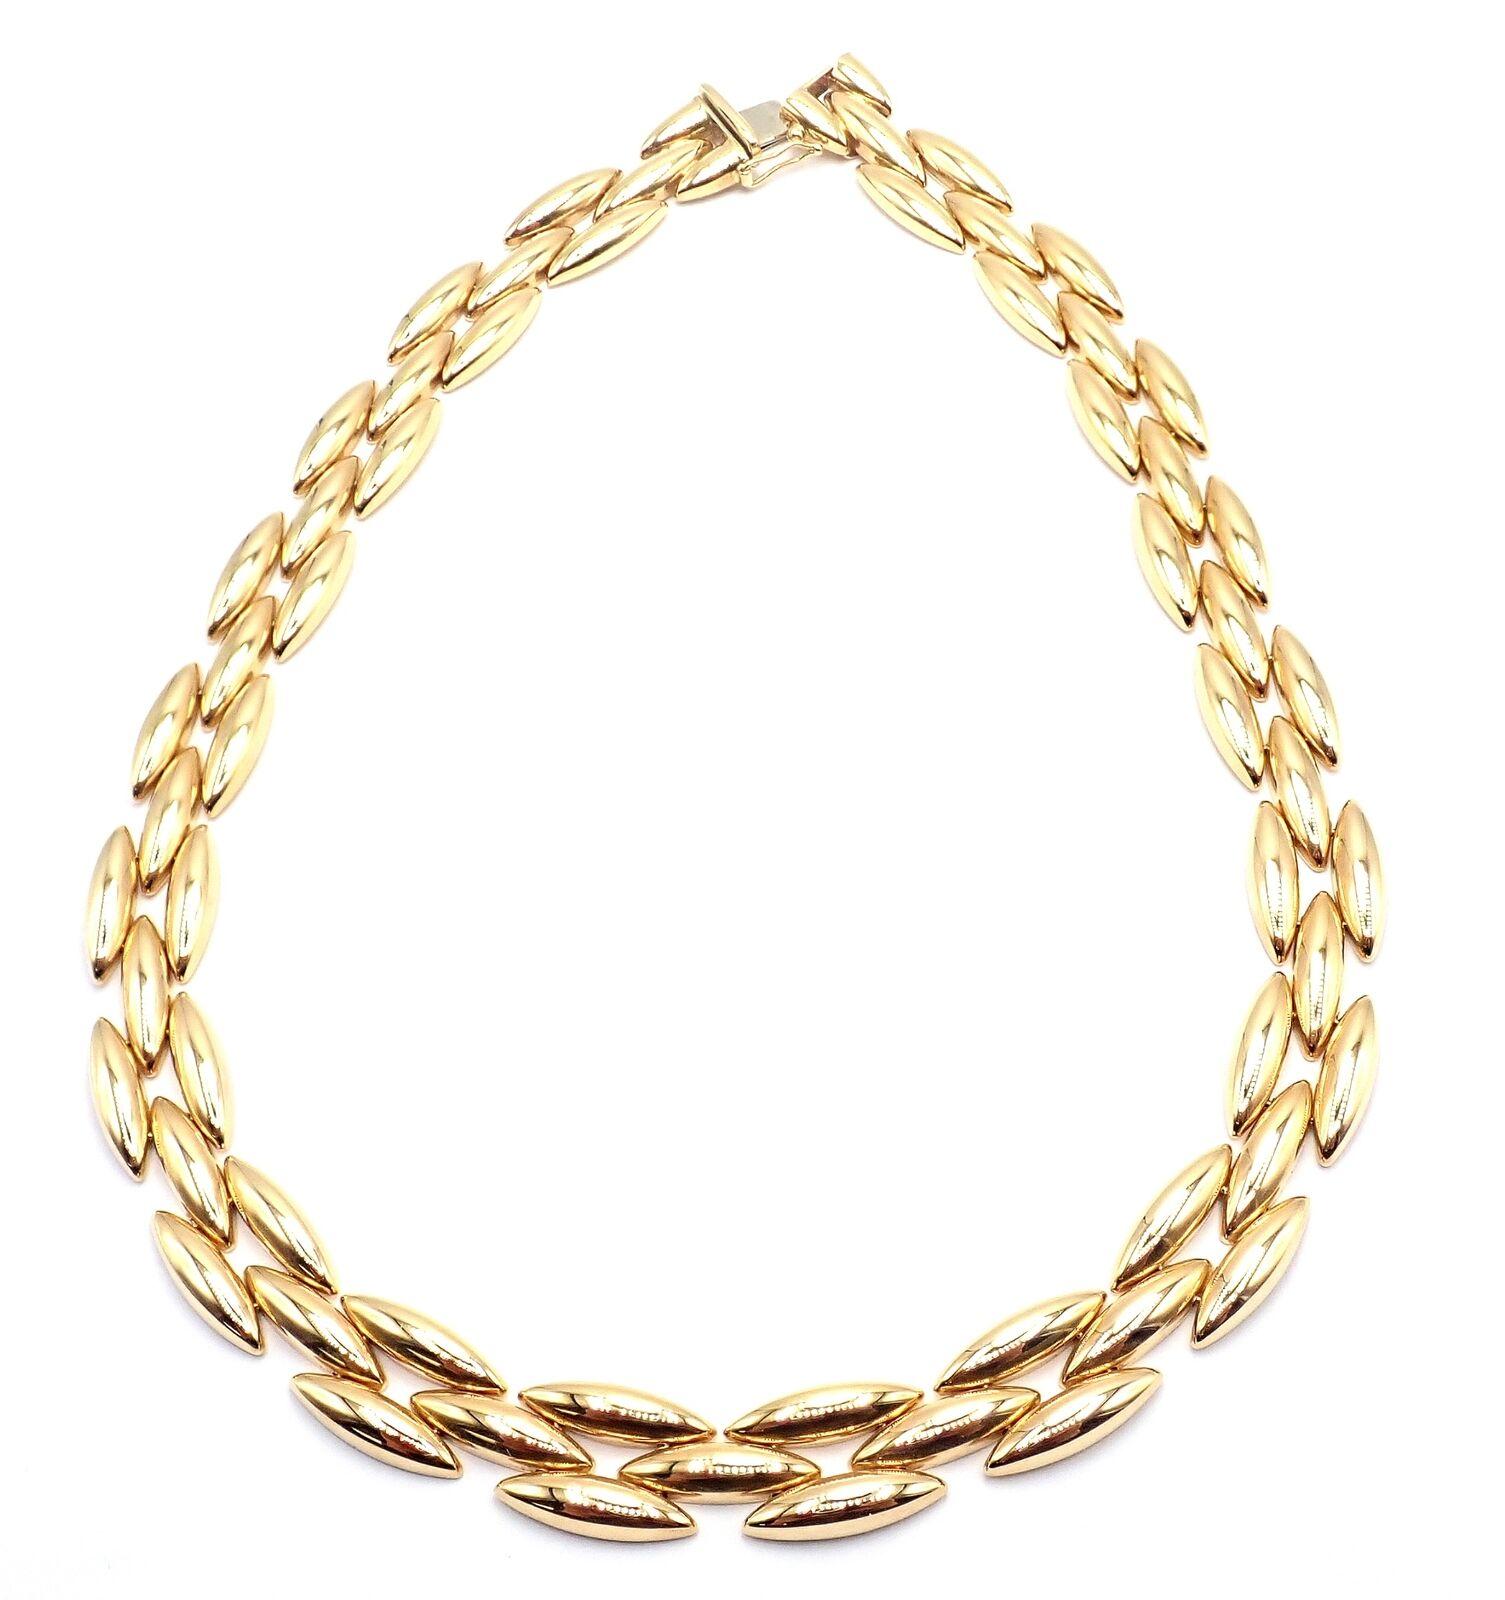 18k Yellow Gold Gentiane 3 Row Rice Link Necklace by Cartier. 
The Cartier Three-Row Gentiane necklace is a magnificent creation, fashioned from 18k yellow gold. 
This piece features elegant rice link chains arranged in three sumptuous layers,